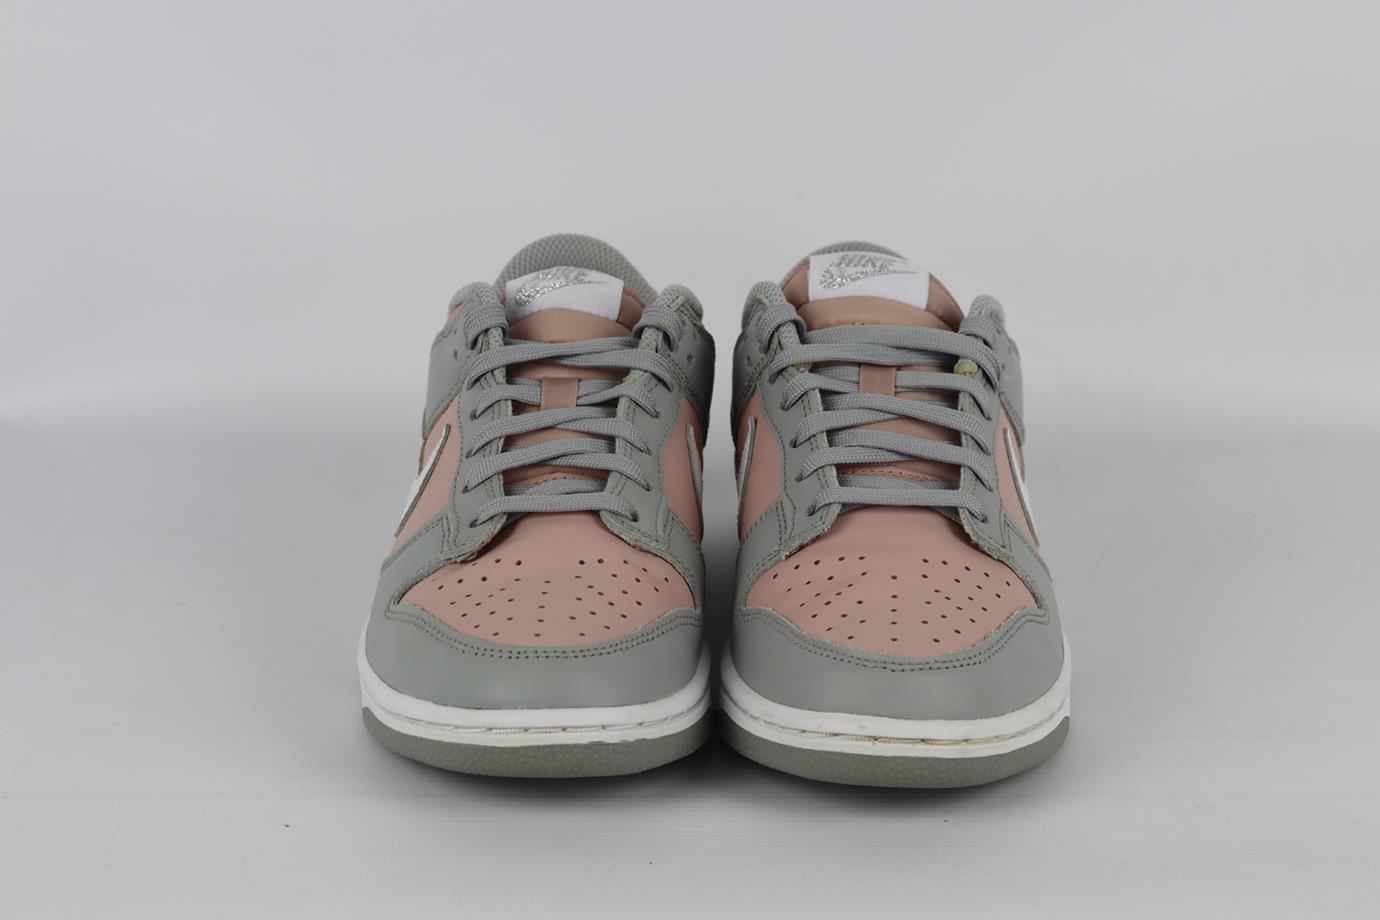 NIKE DUNK LOW PINK OXFORD LEATHER SNEAKERS EU 39 UK 5.5 US 8